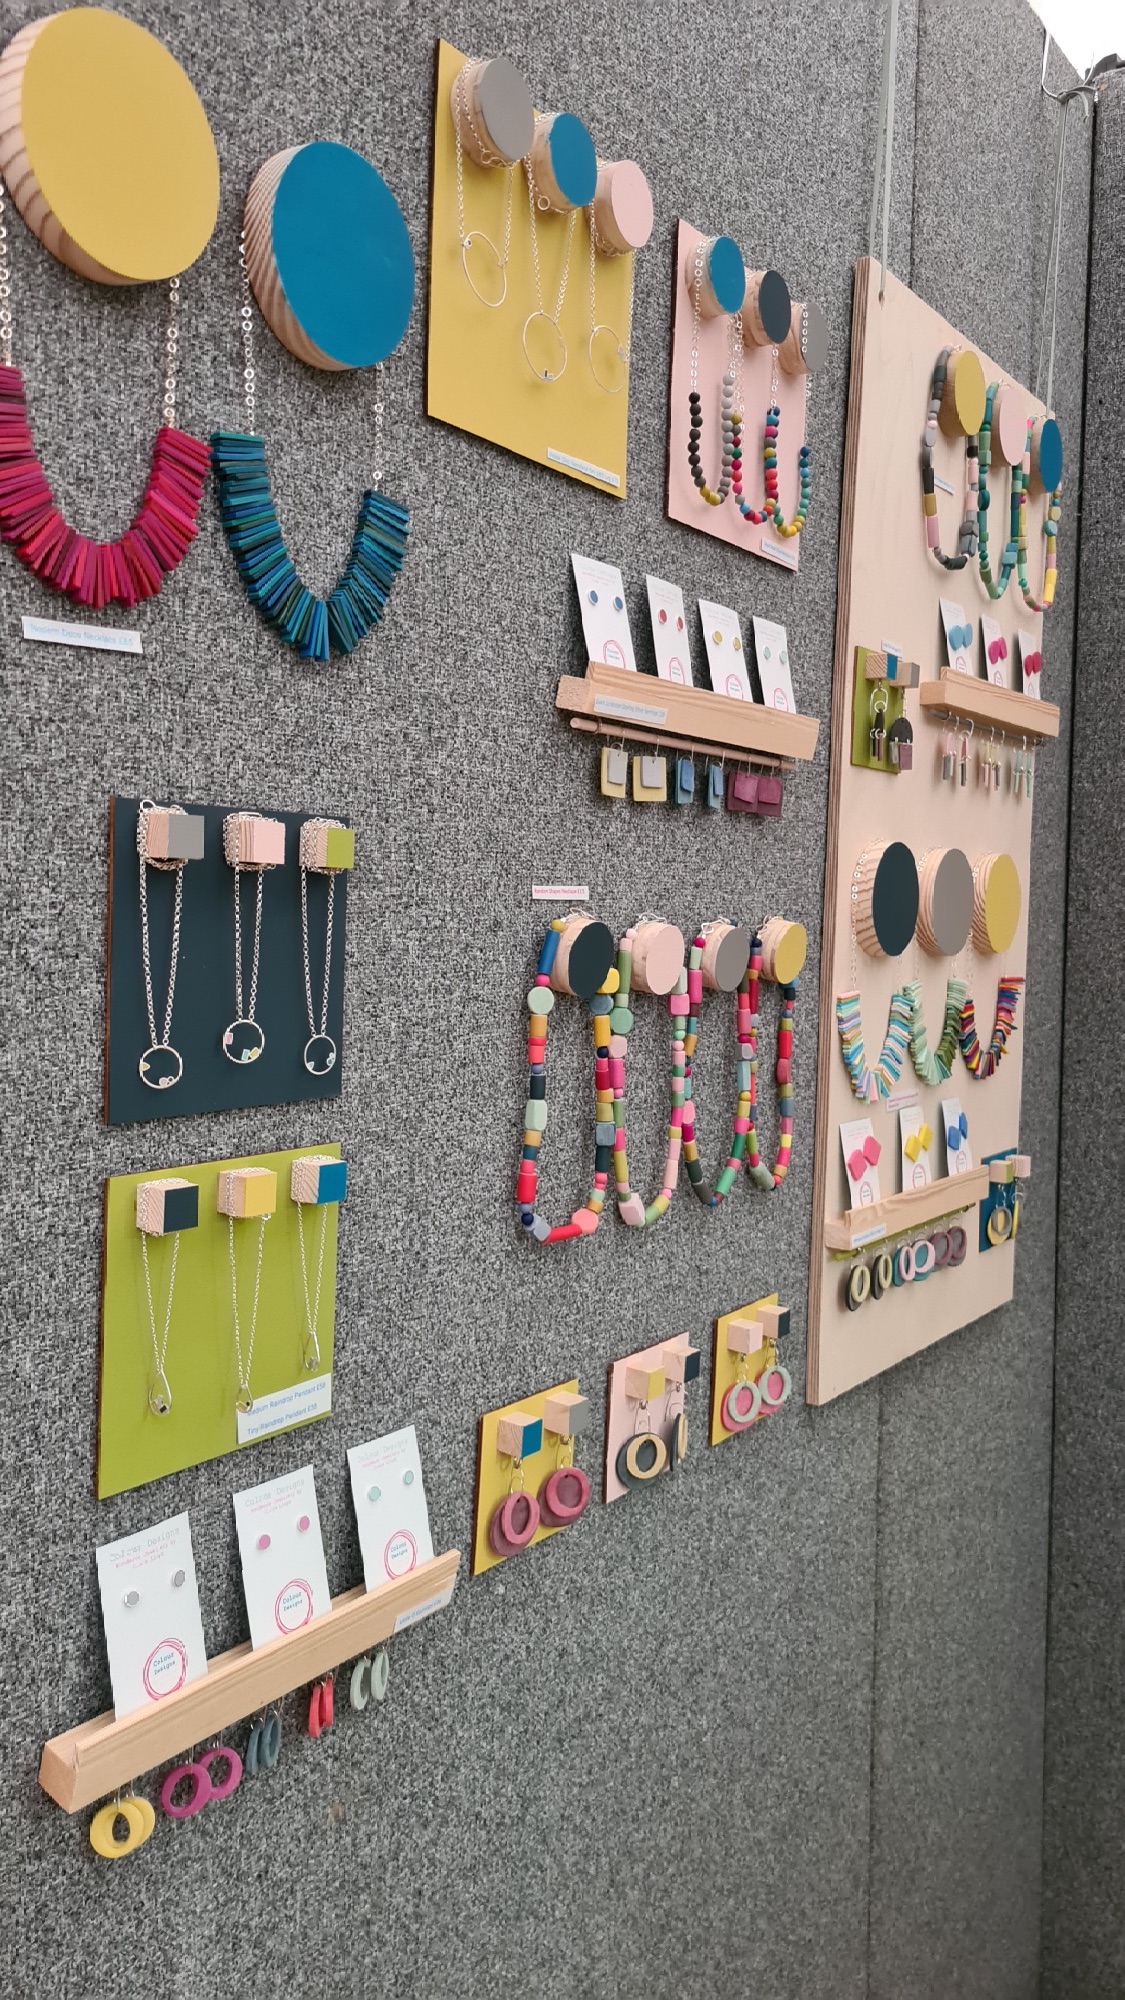 Colour Designs Jewellery stand at Bovey Tracey Craft Festival 2021